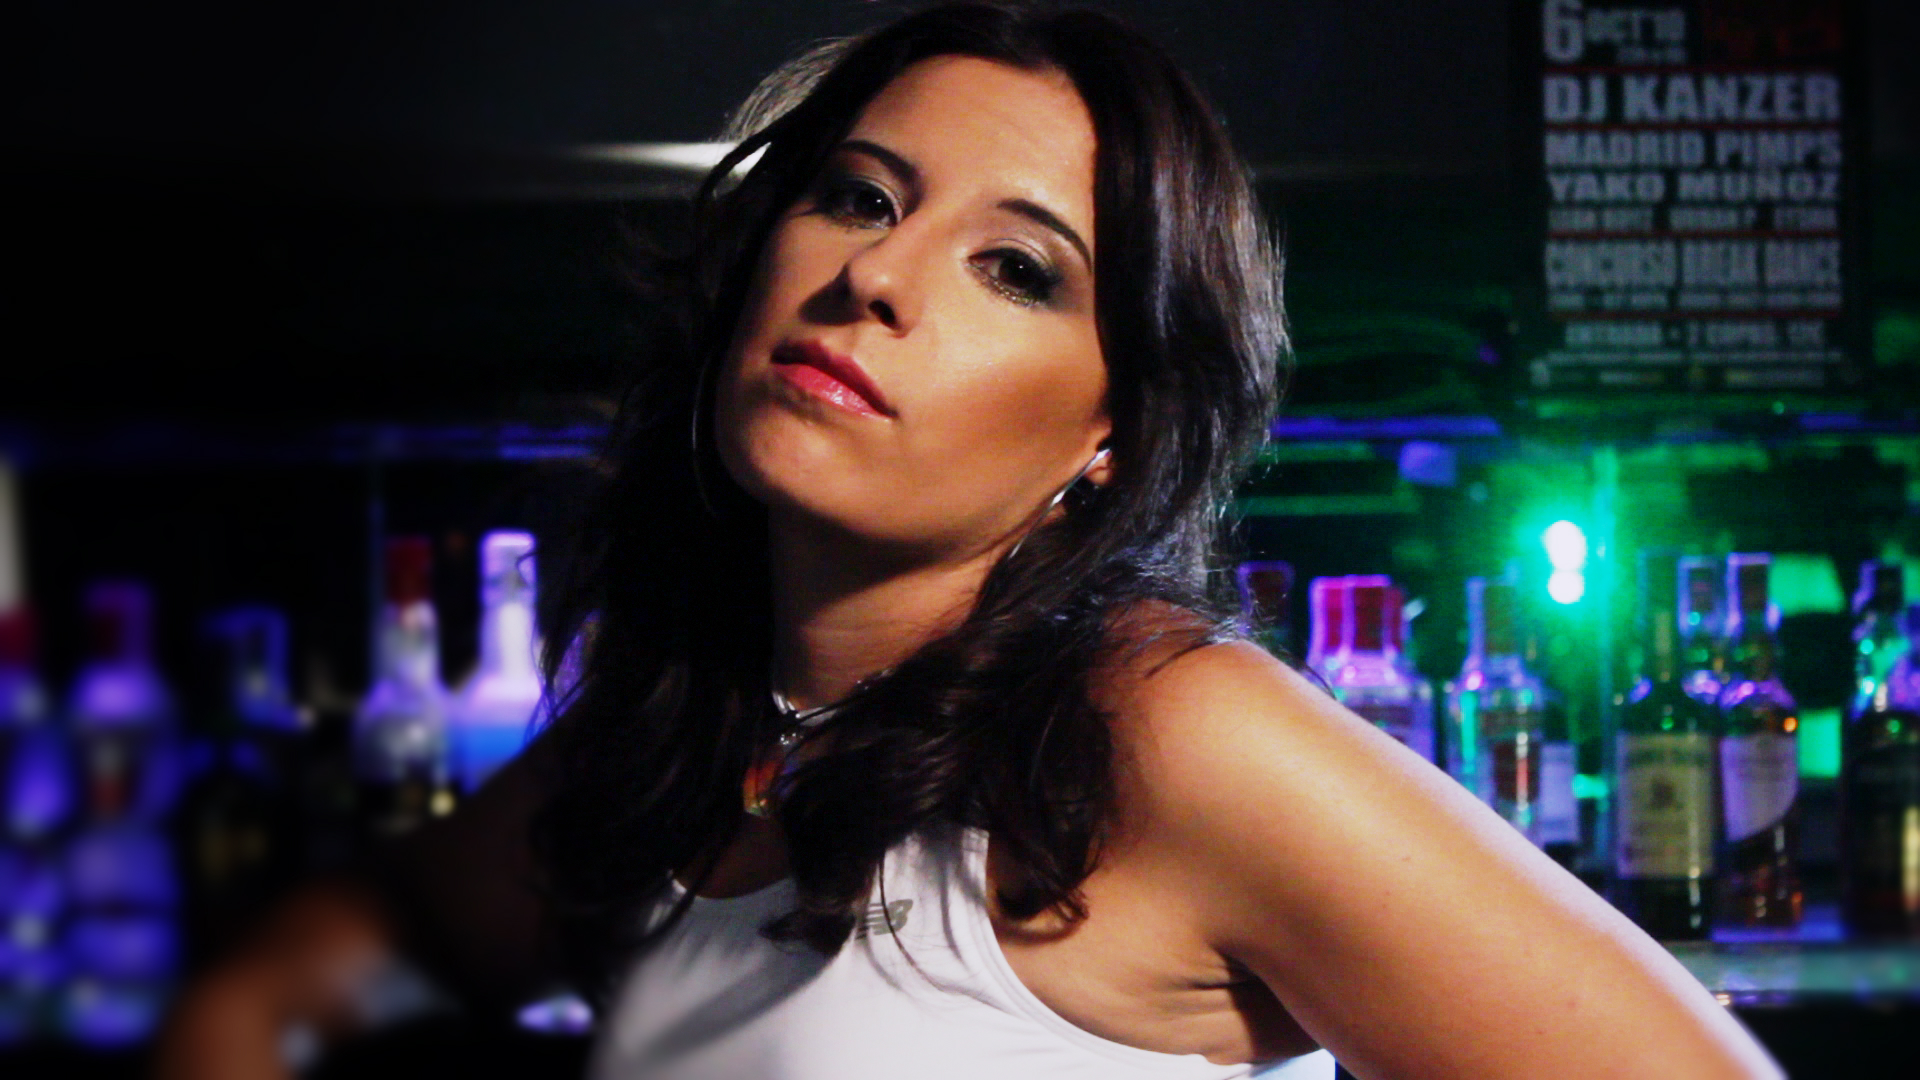 IreneB releases “V.I.P.” music video